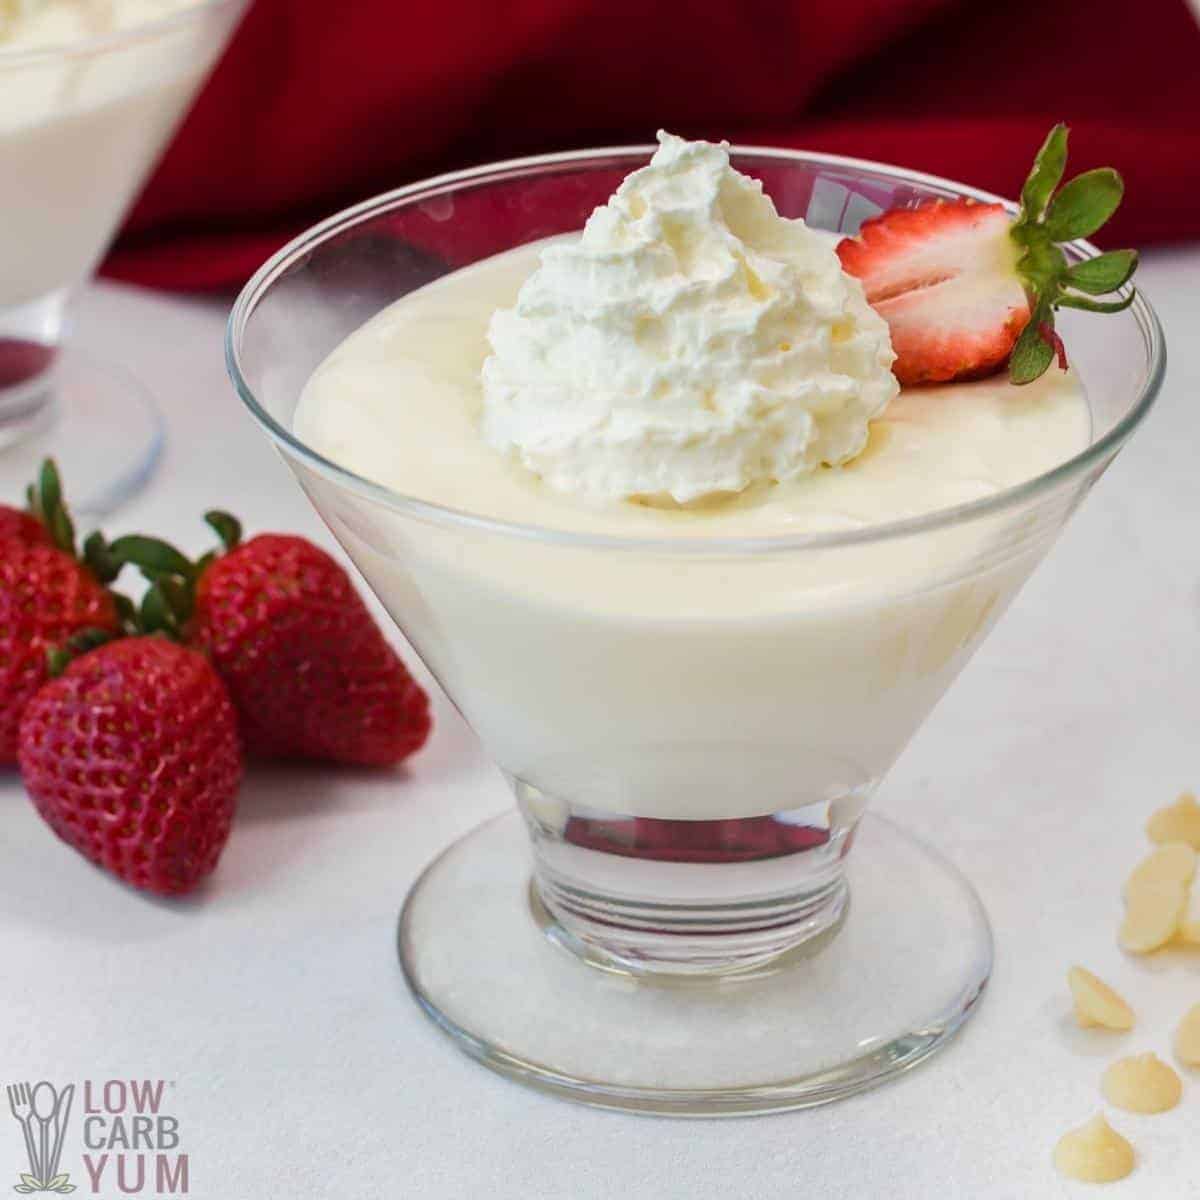 white chocolate mousse in glass dessert dish.